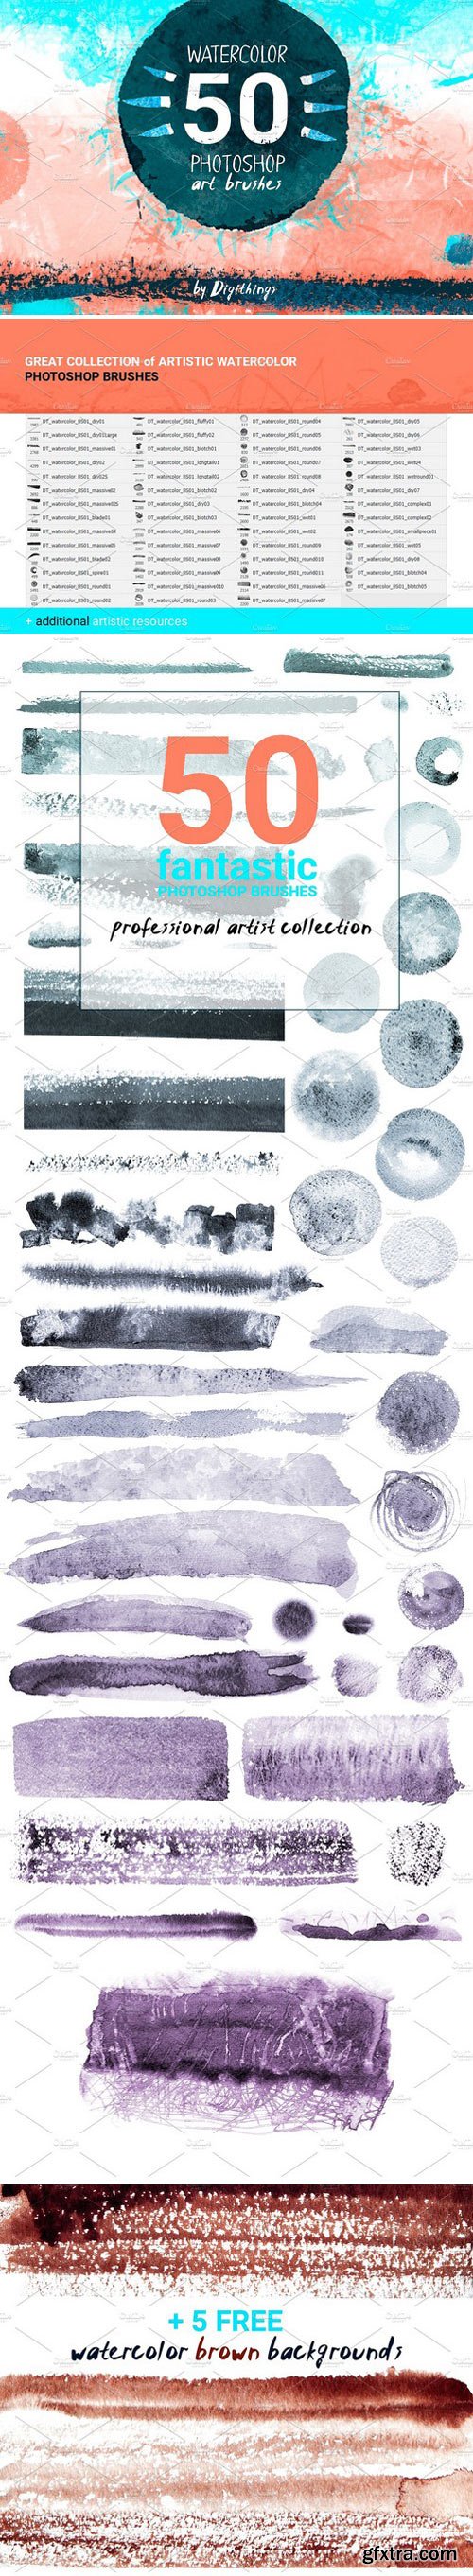 CM - Watercolor art brushes for Photoshop 1834996